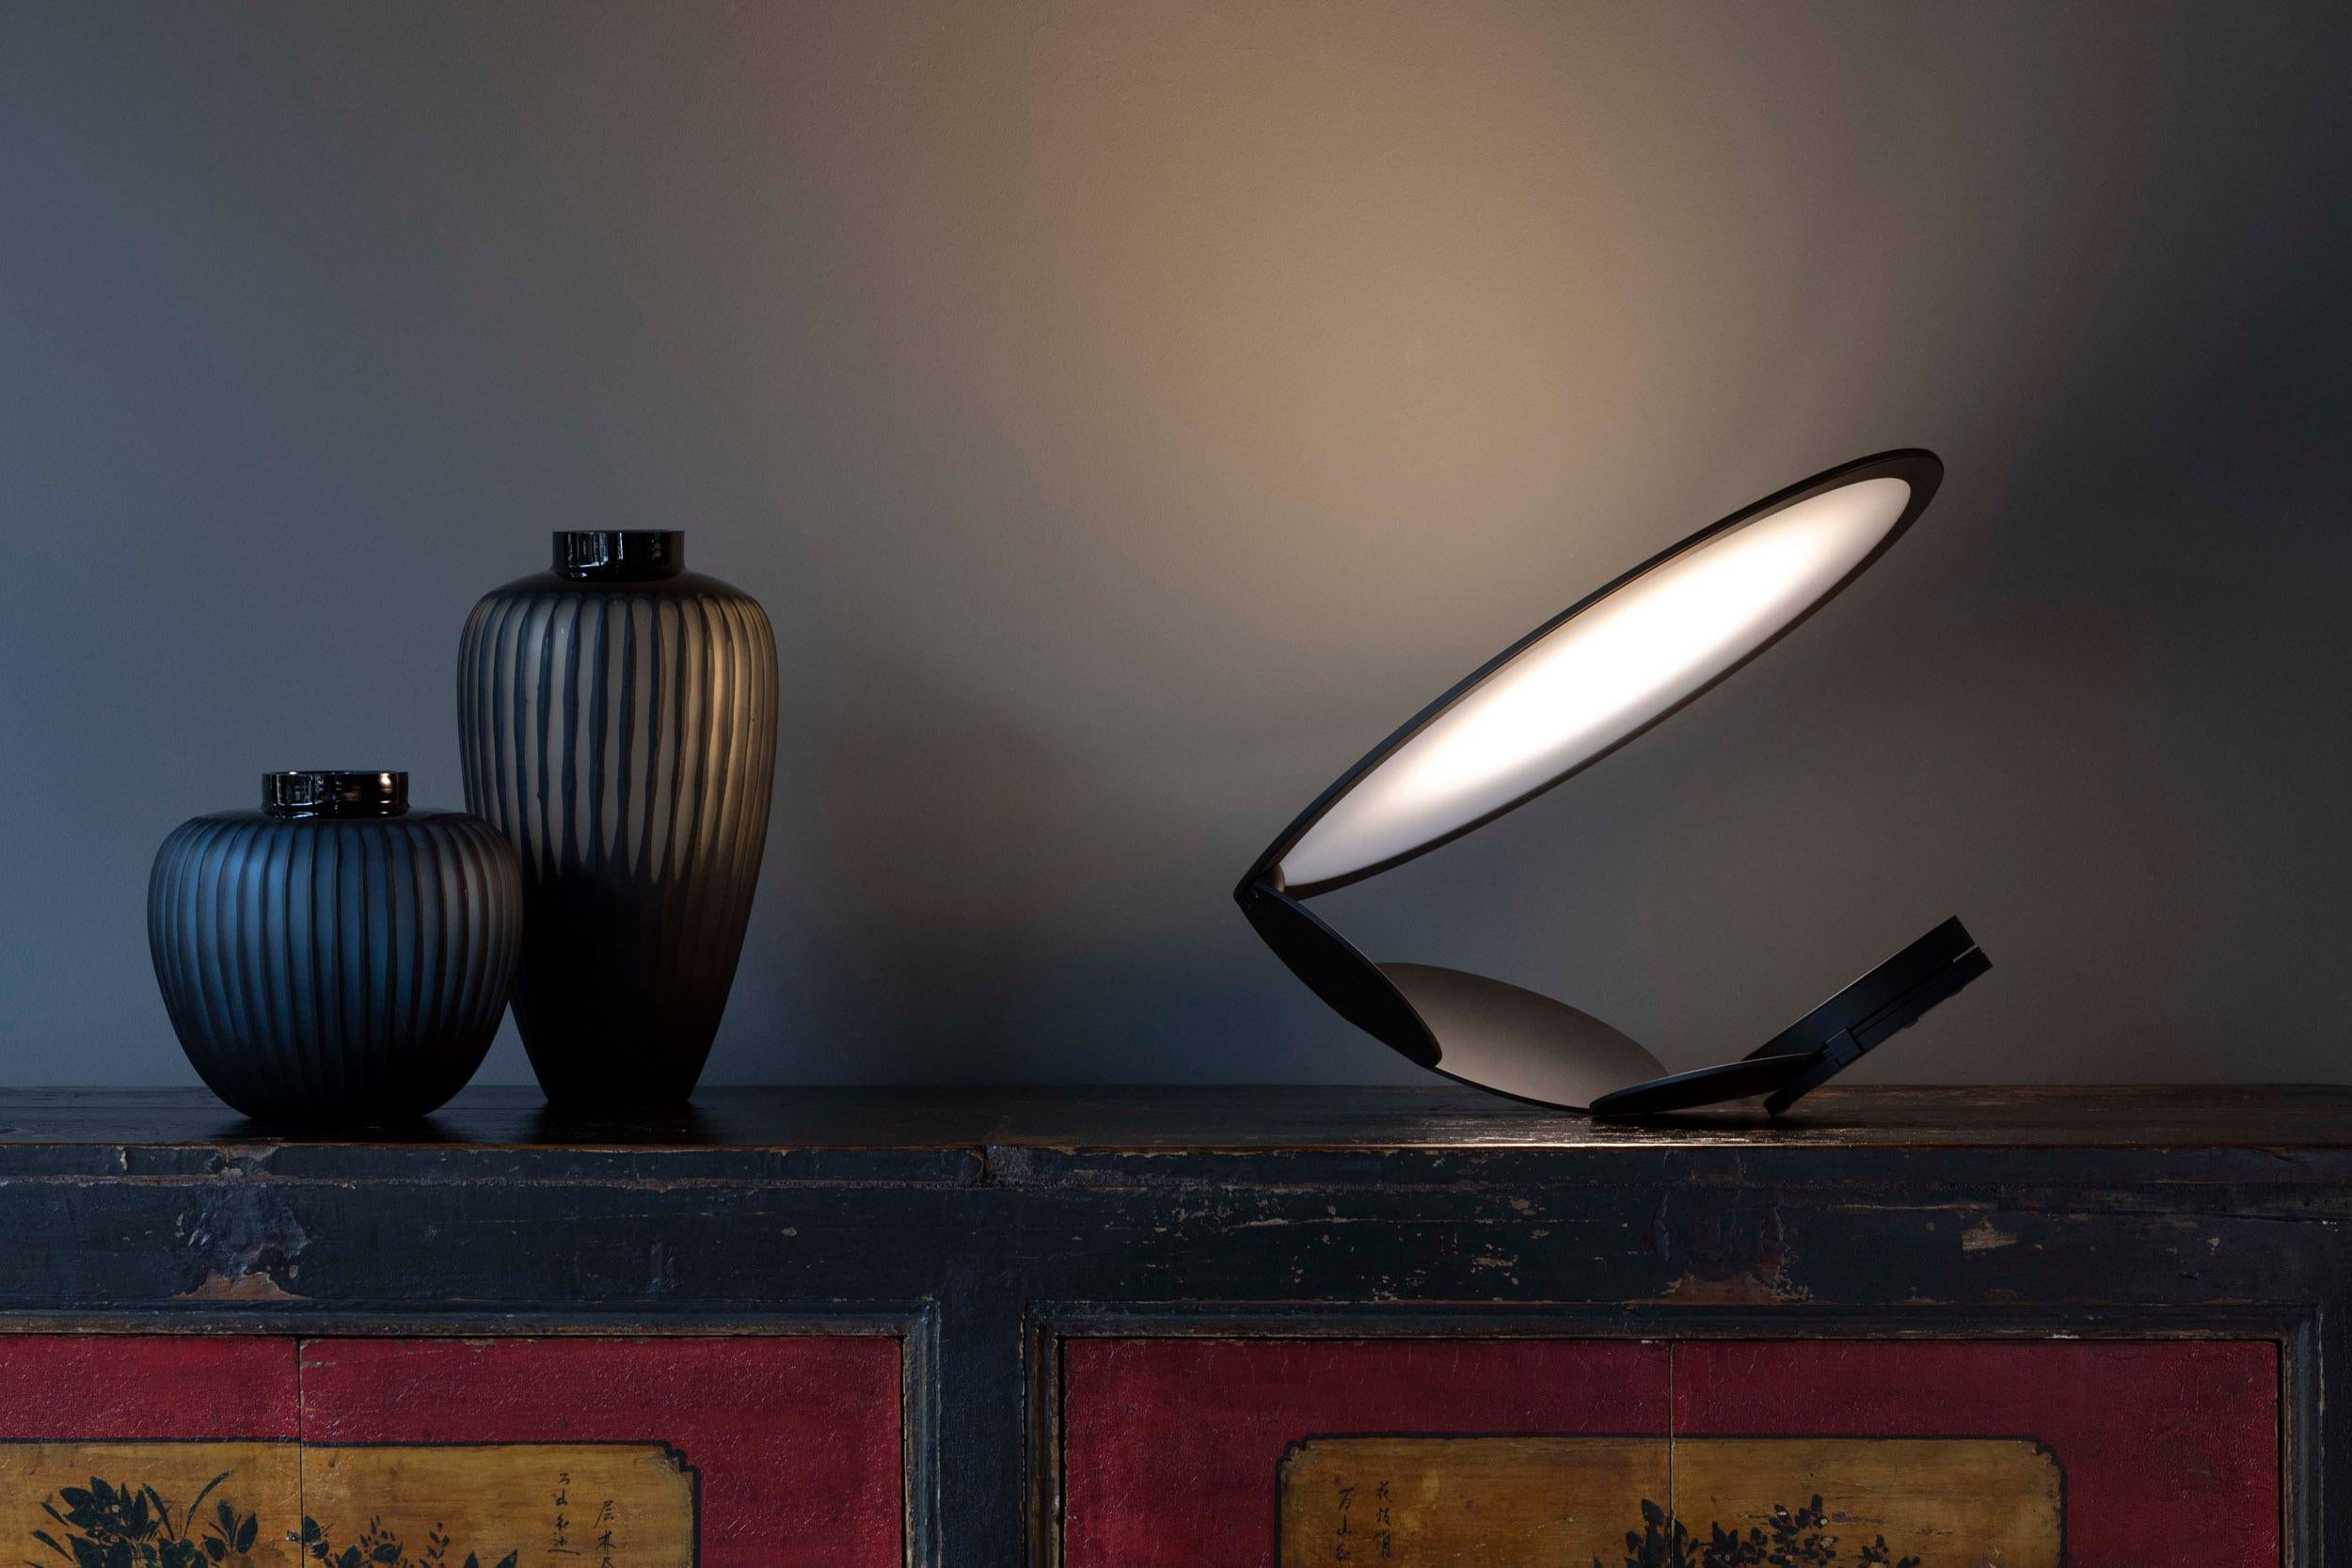 Winner of a “Gooddesign” award 2019-2020 for the lighting category, Cut is the result of a long design process between Axolight and Timo Ripatti, aimed at the design of an adjustable lamp, that can be positioned on three points and never glares.